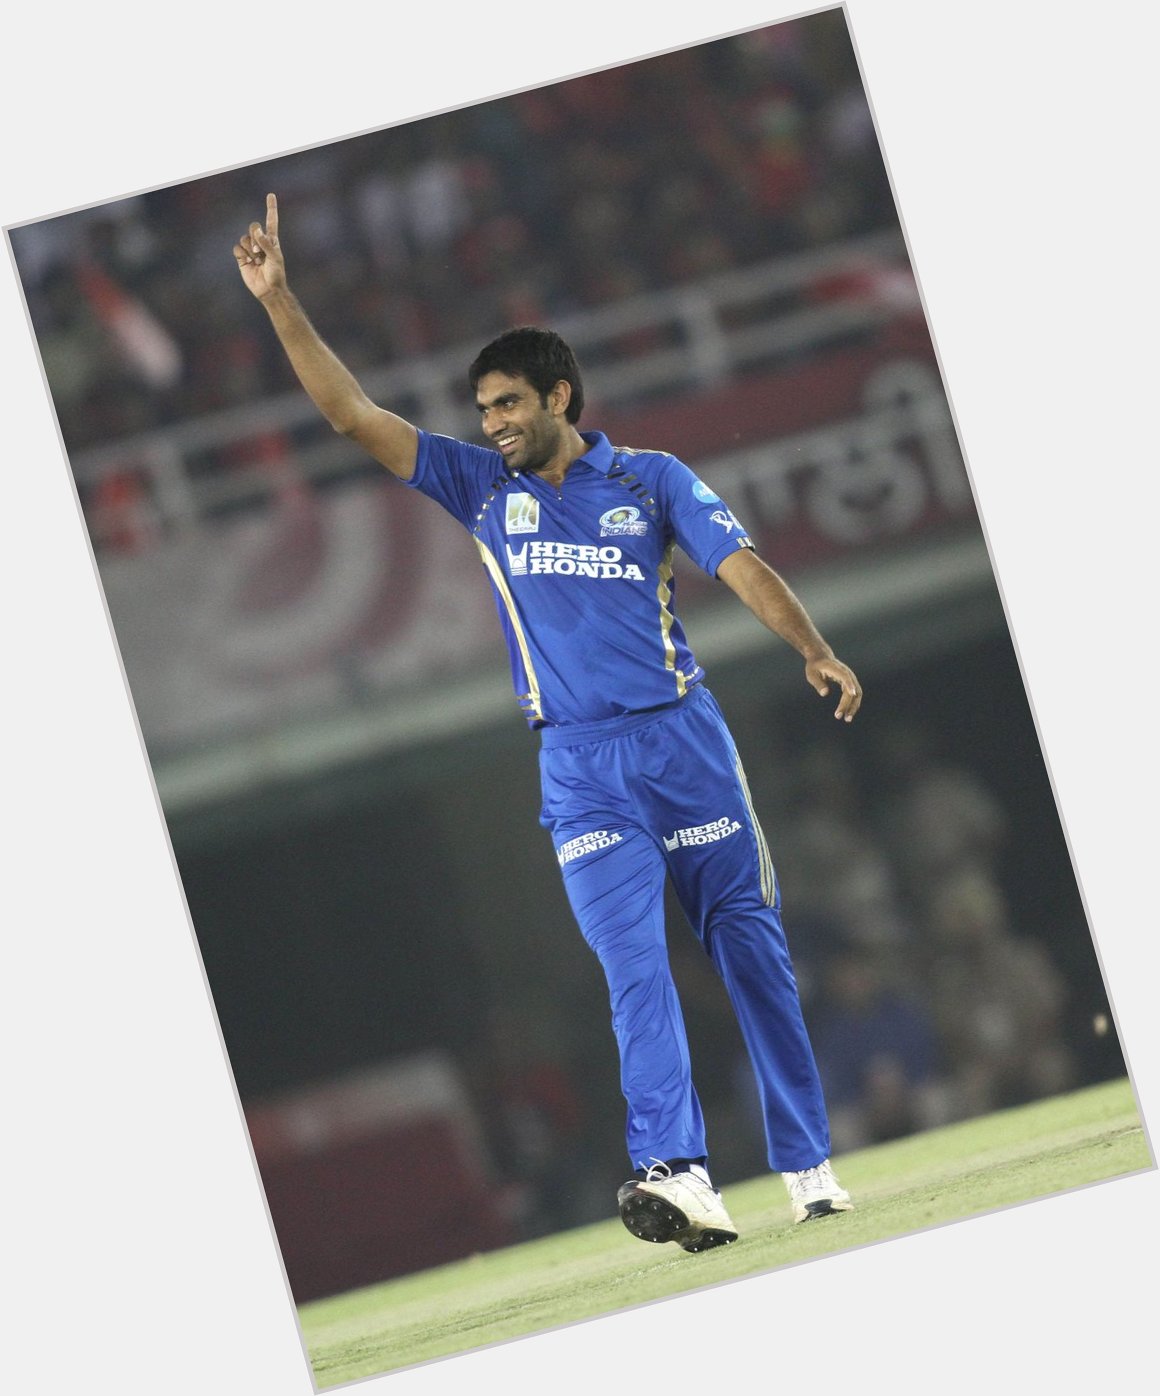 4  0  wickets and 1  IPL title in the MI Blue and Gold!  Happy birthday, Munaf Patel  